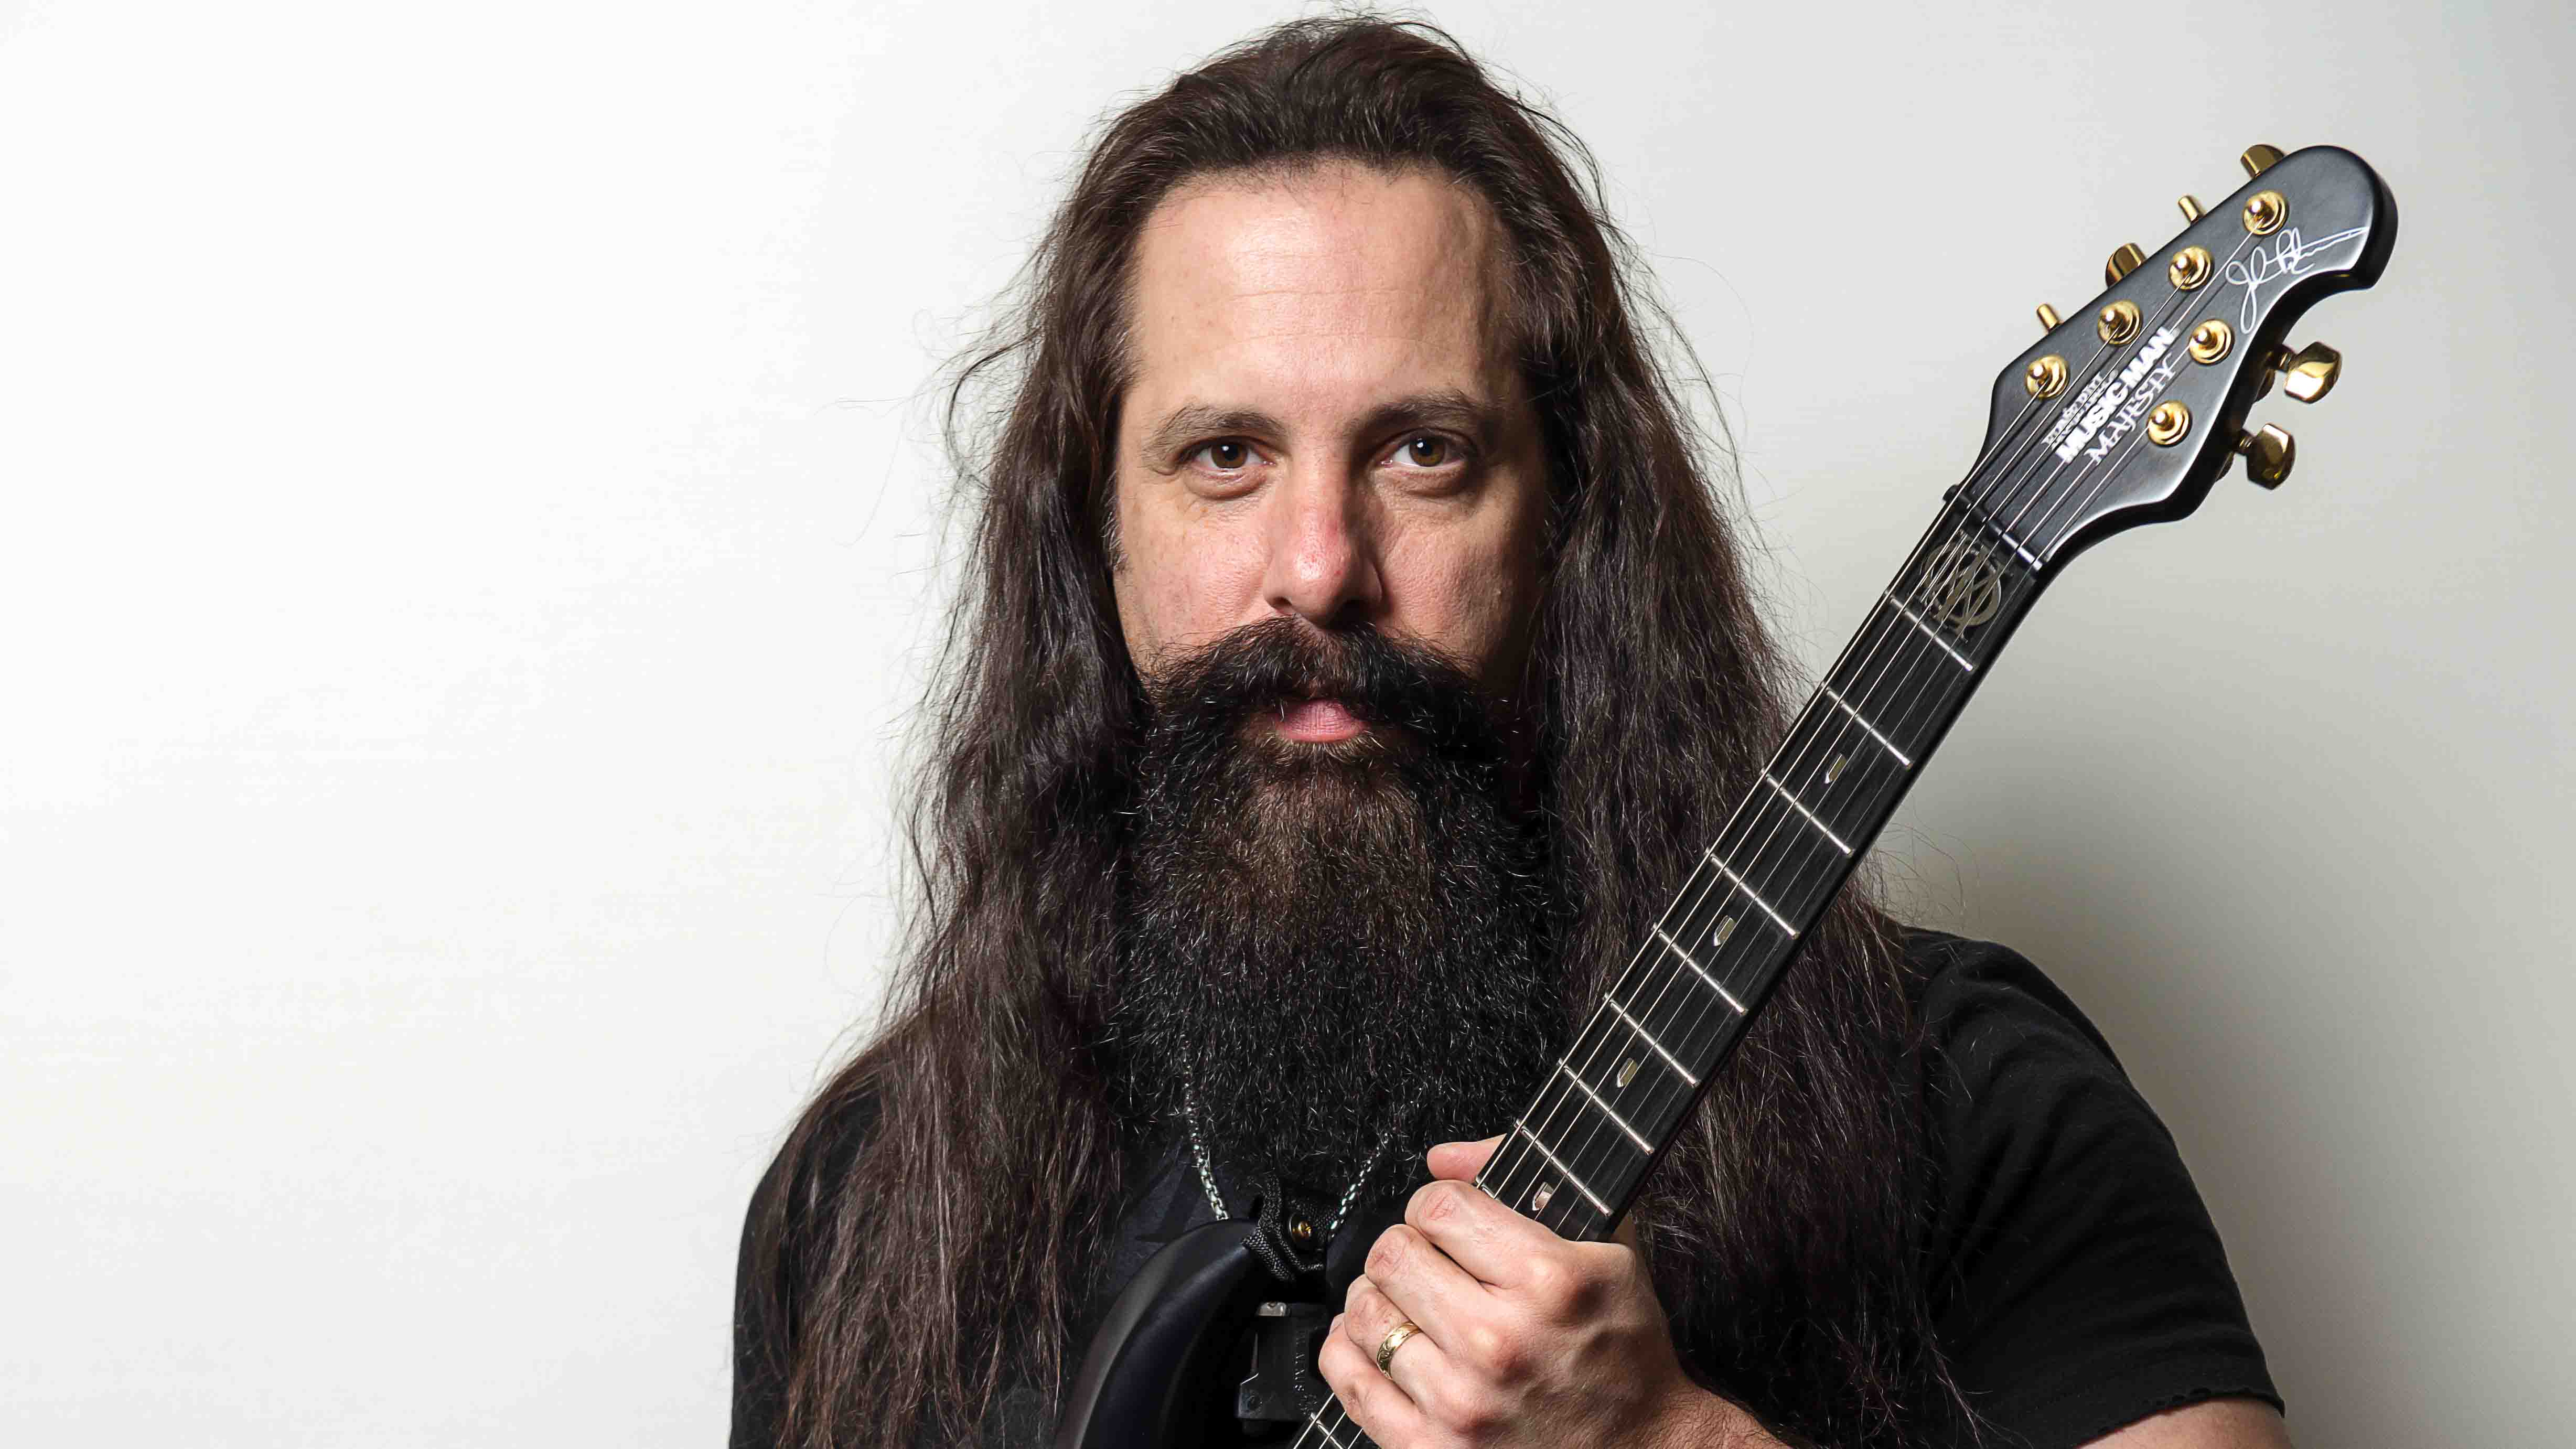 John Petrucci "G3 made me rise to the occasion and gain more